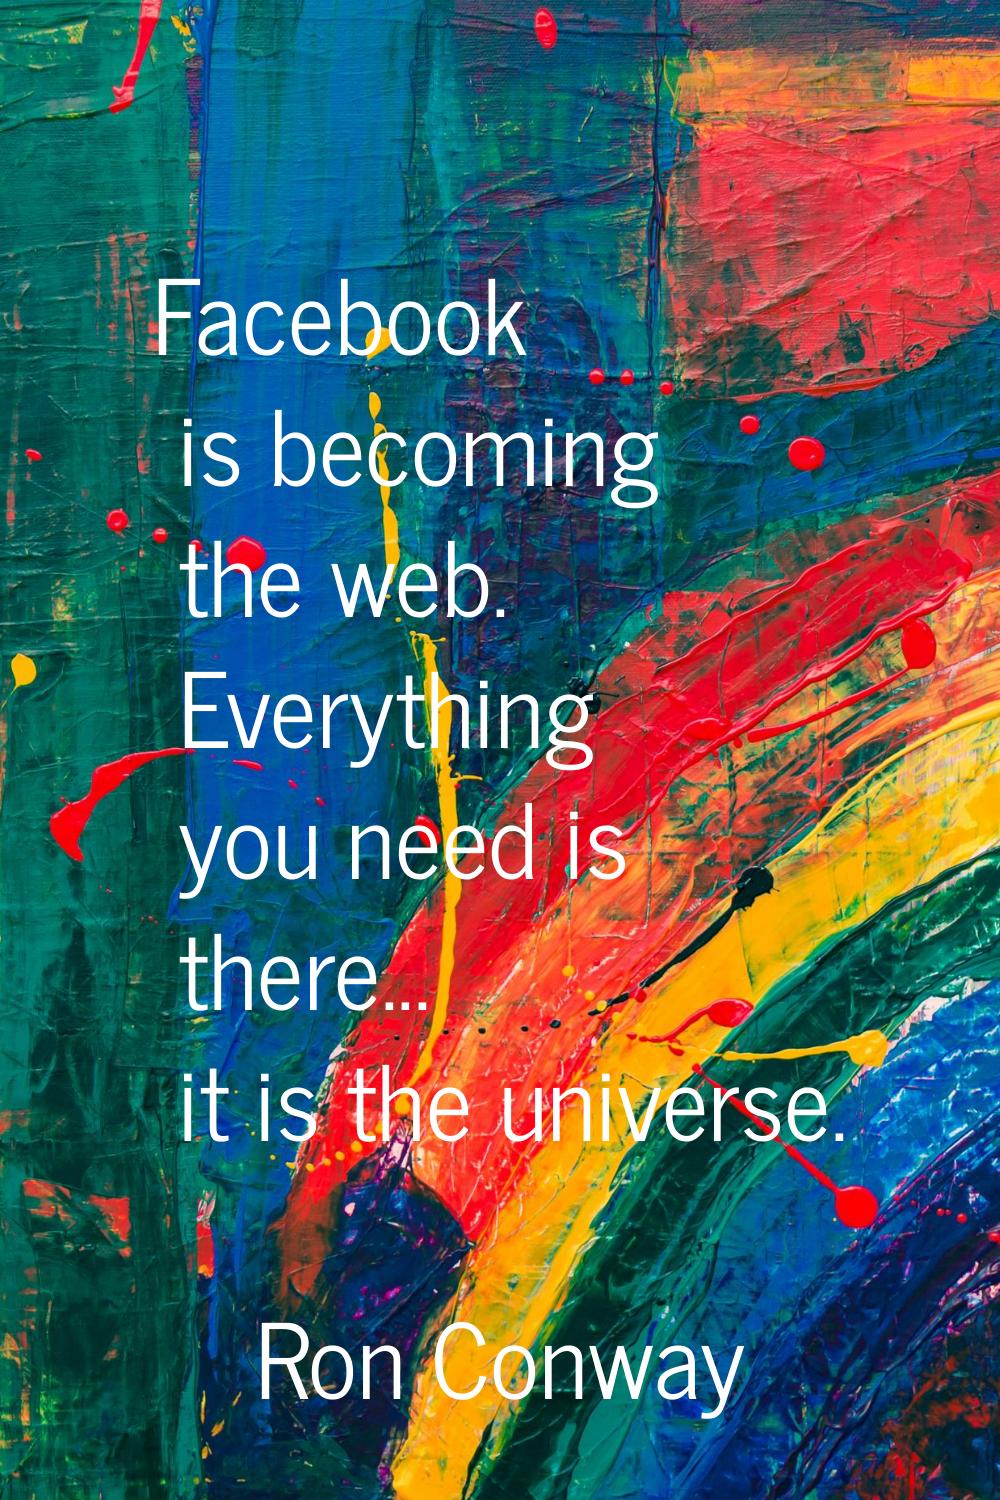 Facebook is becoming the web. Everything you need is there... it is the universe.